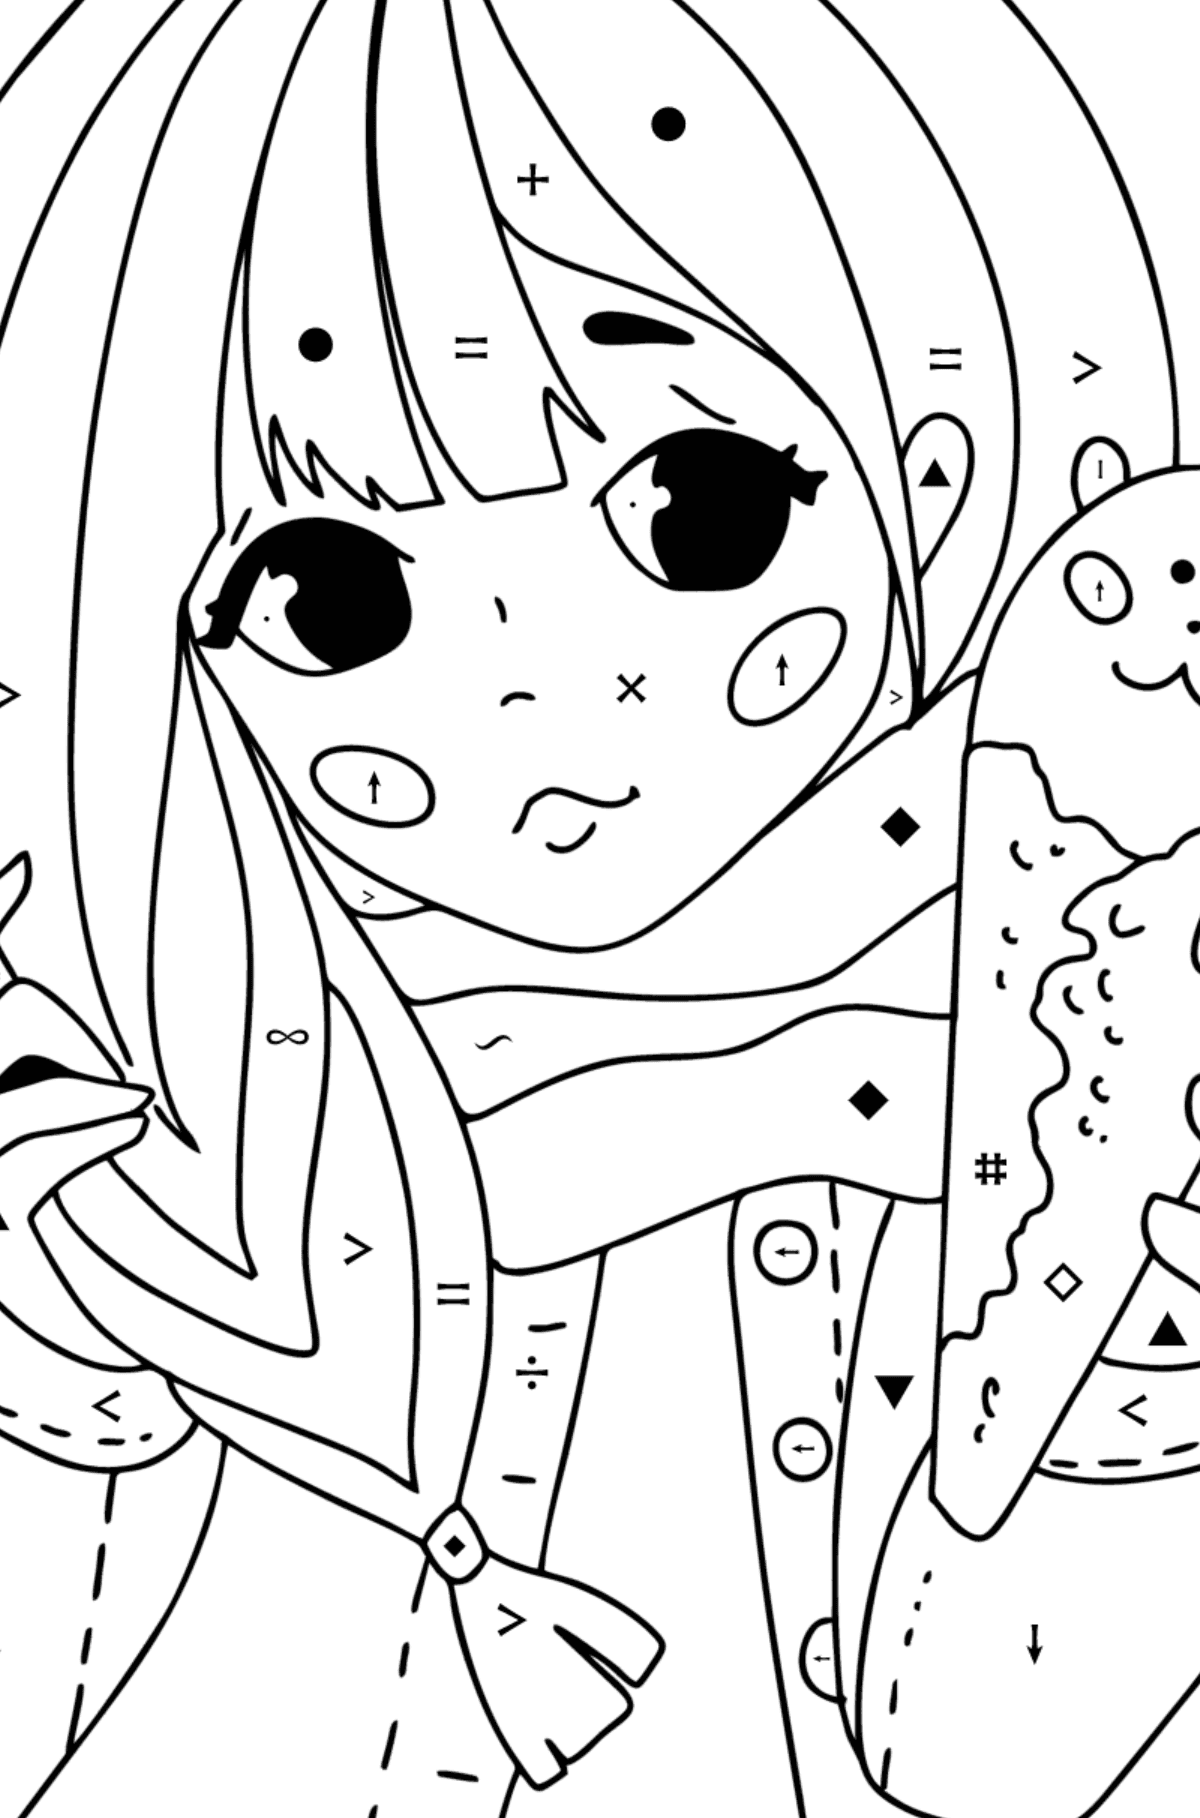 Get This Cute Anime Girl Face Coloring Pages Free Printable hi51 !